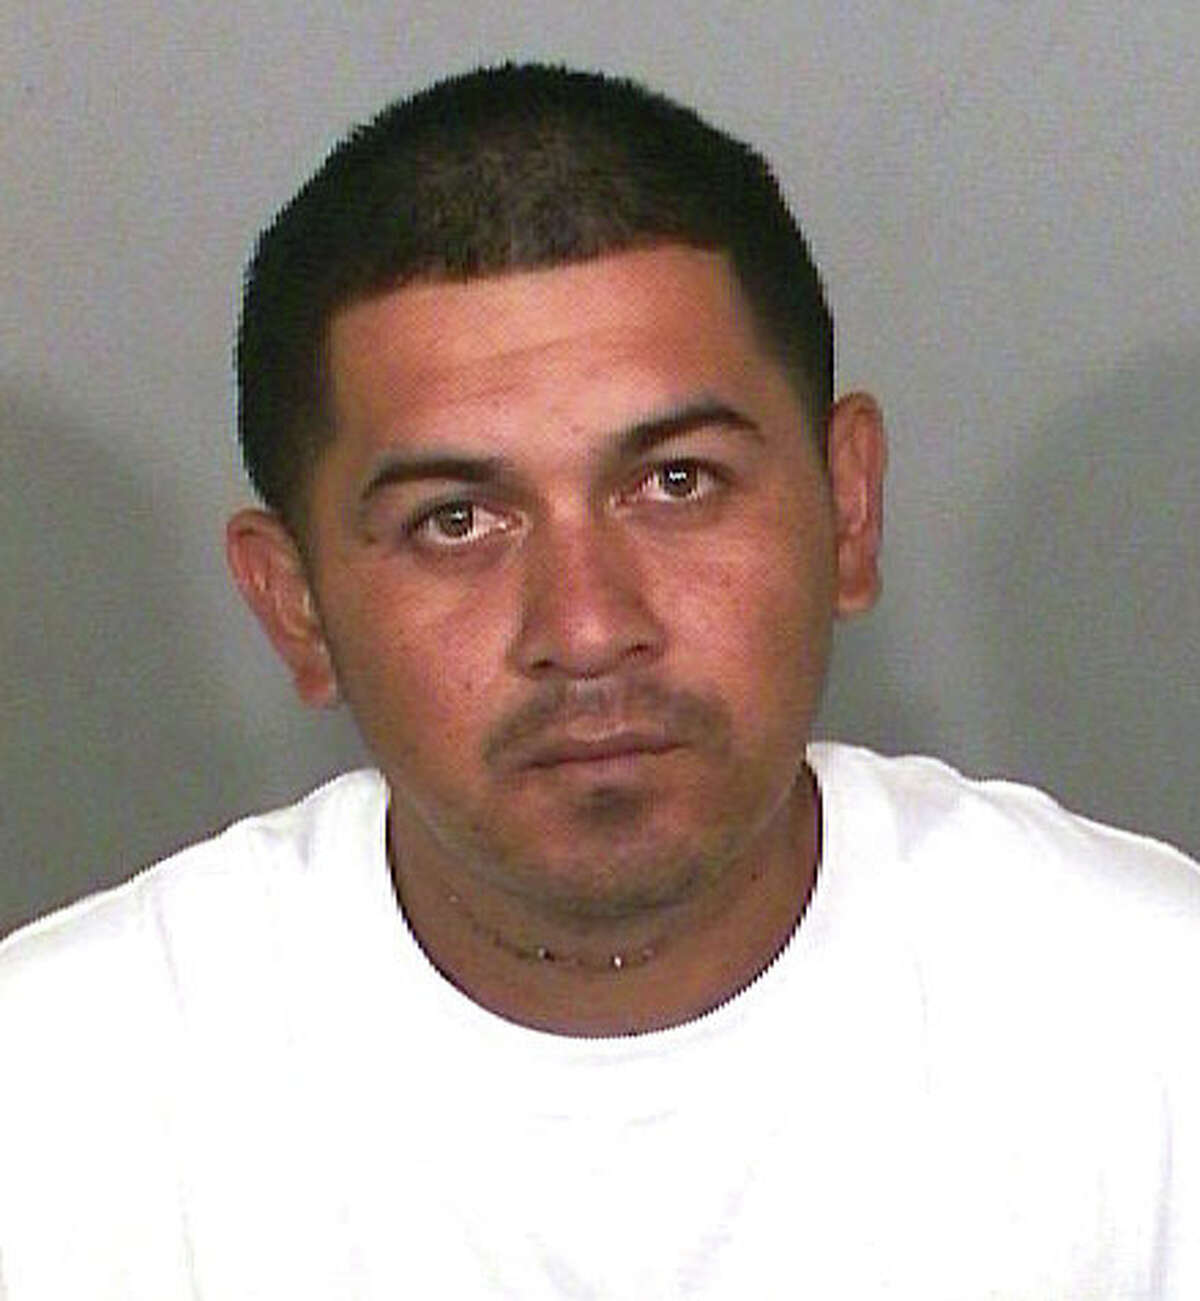 Arturo Dota is accused of fatally stabbing the 23-year-old mother of his two young children.